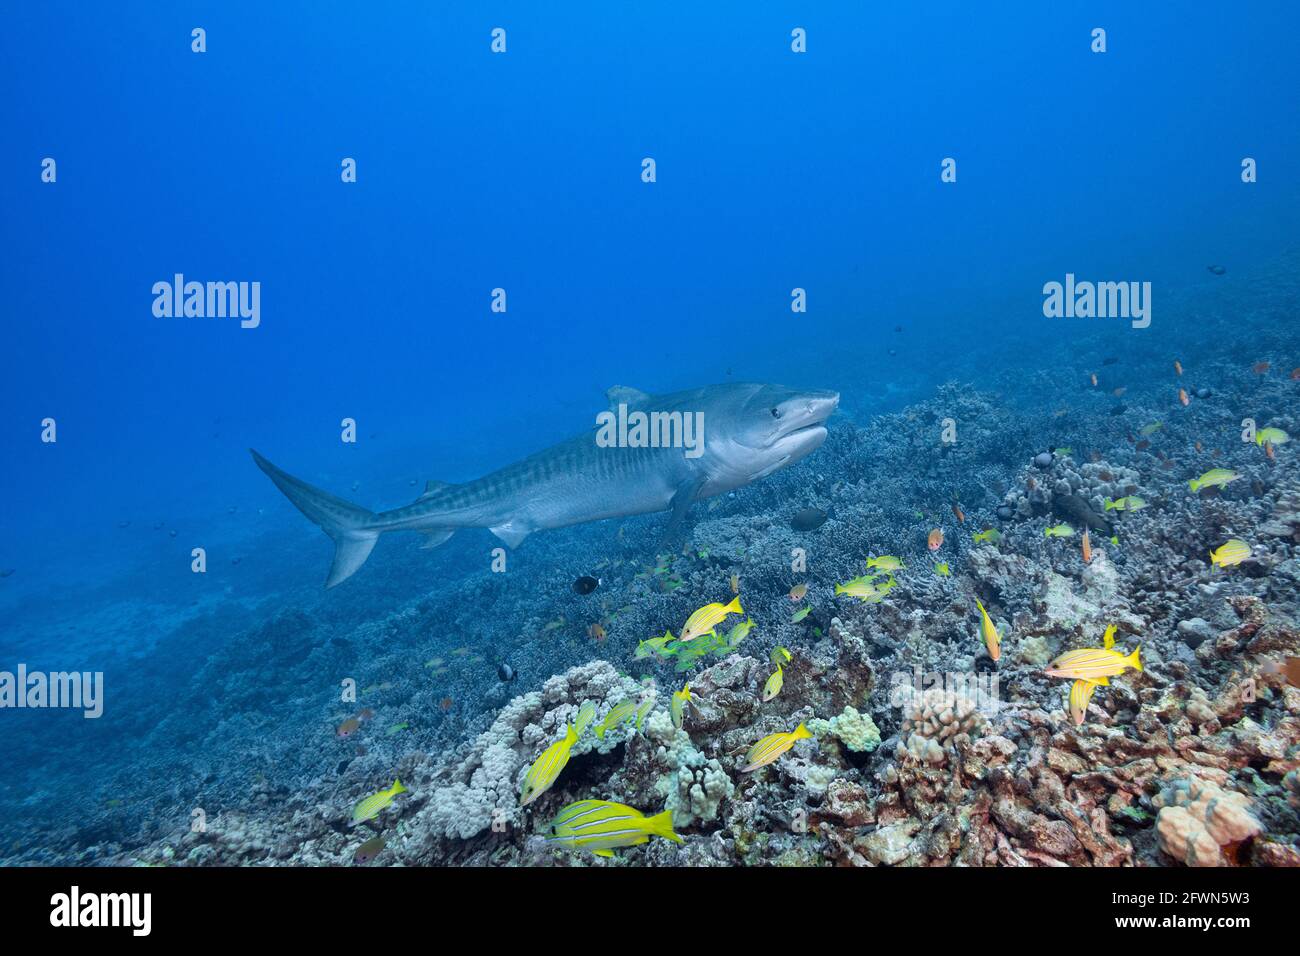 tiger shark, Galeocerdo cuvier, with small remora attached under lower jaw, swims over coral reef with school of bluestripe snapper, Kona, Hawaii, USA Stock Photo